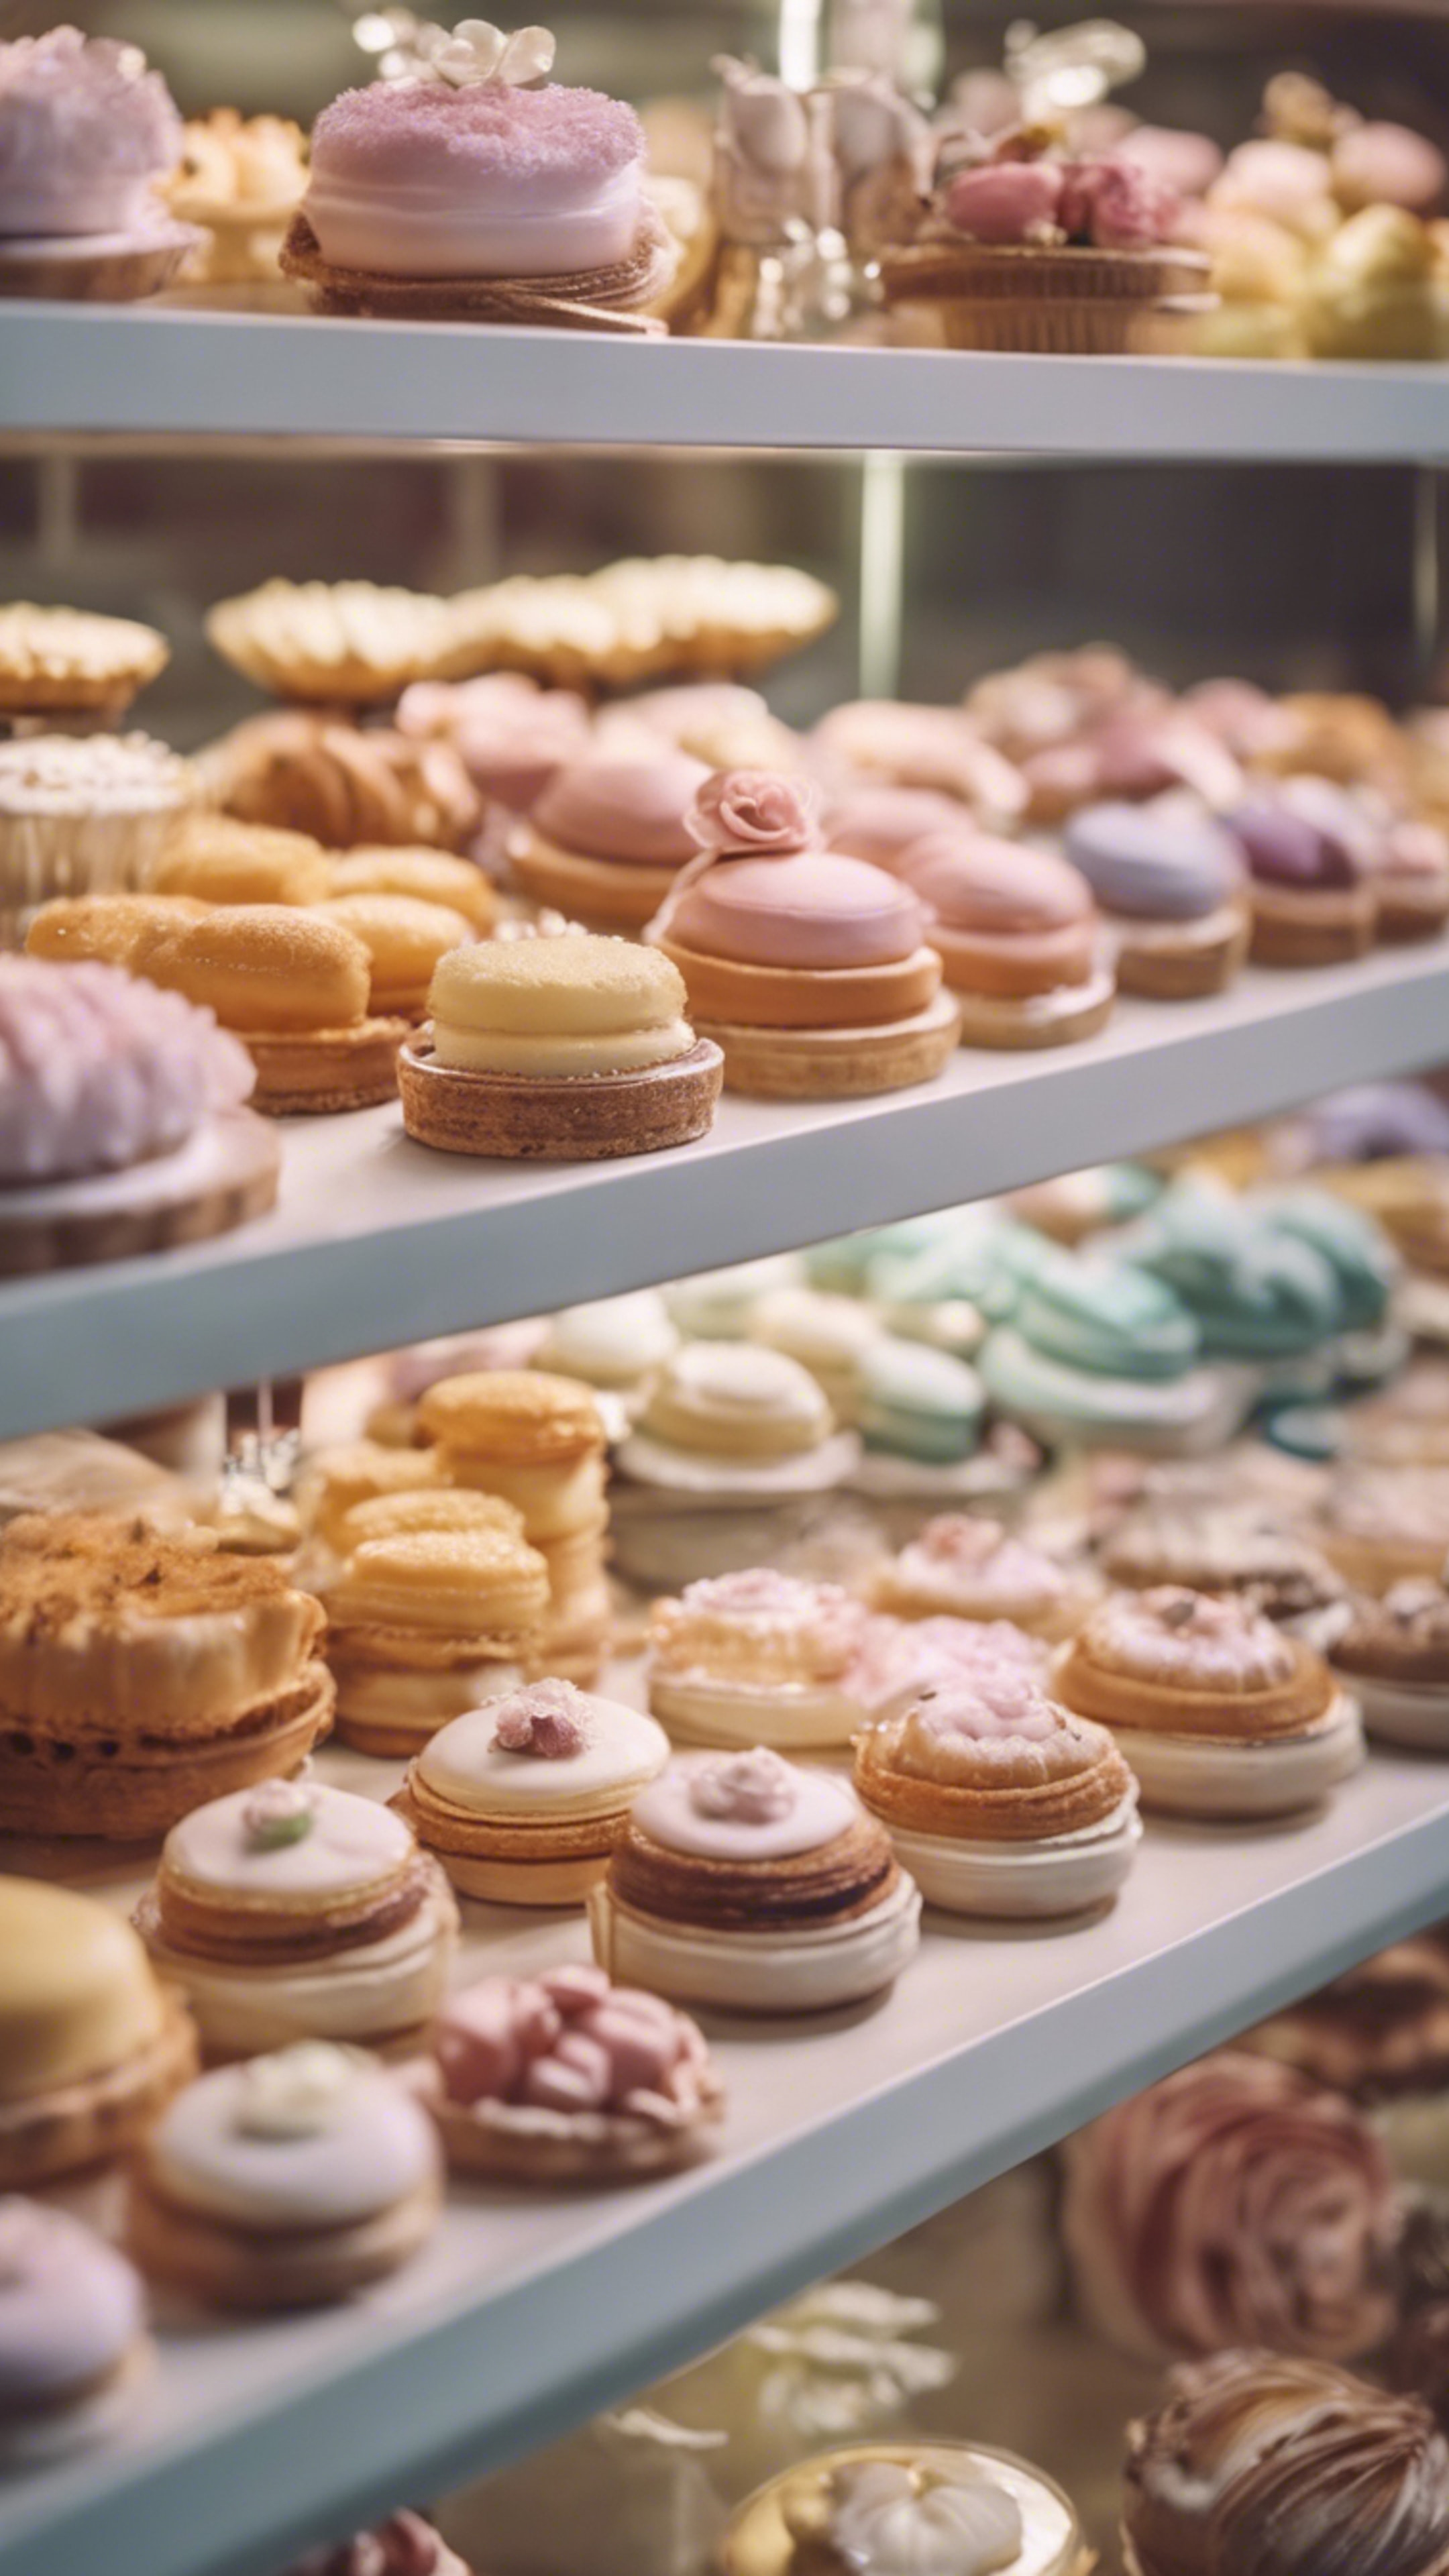 A classic French patisserie in pastel colors, filled with elegantly fashioned cakes and pastries. 벽지[85bb484f9d7f40c5ac29]